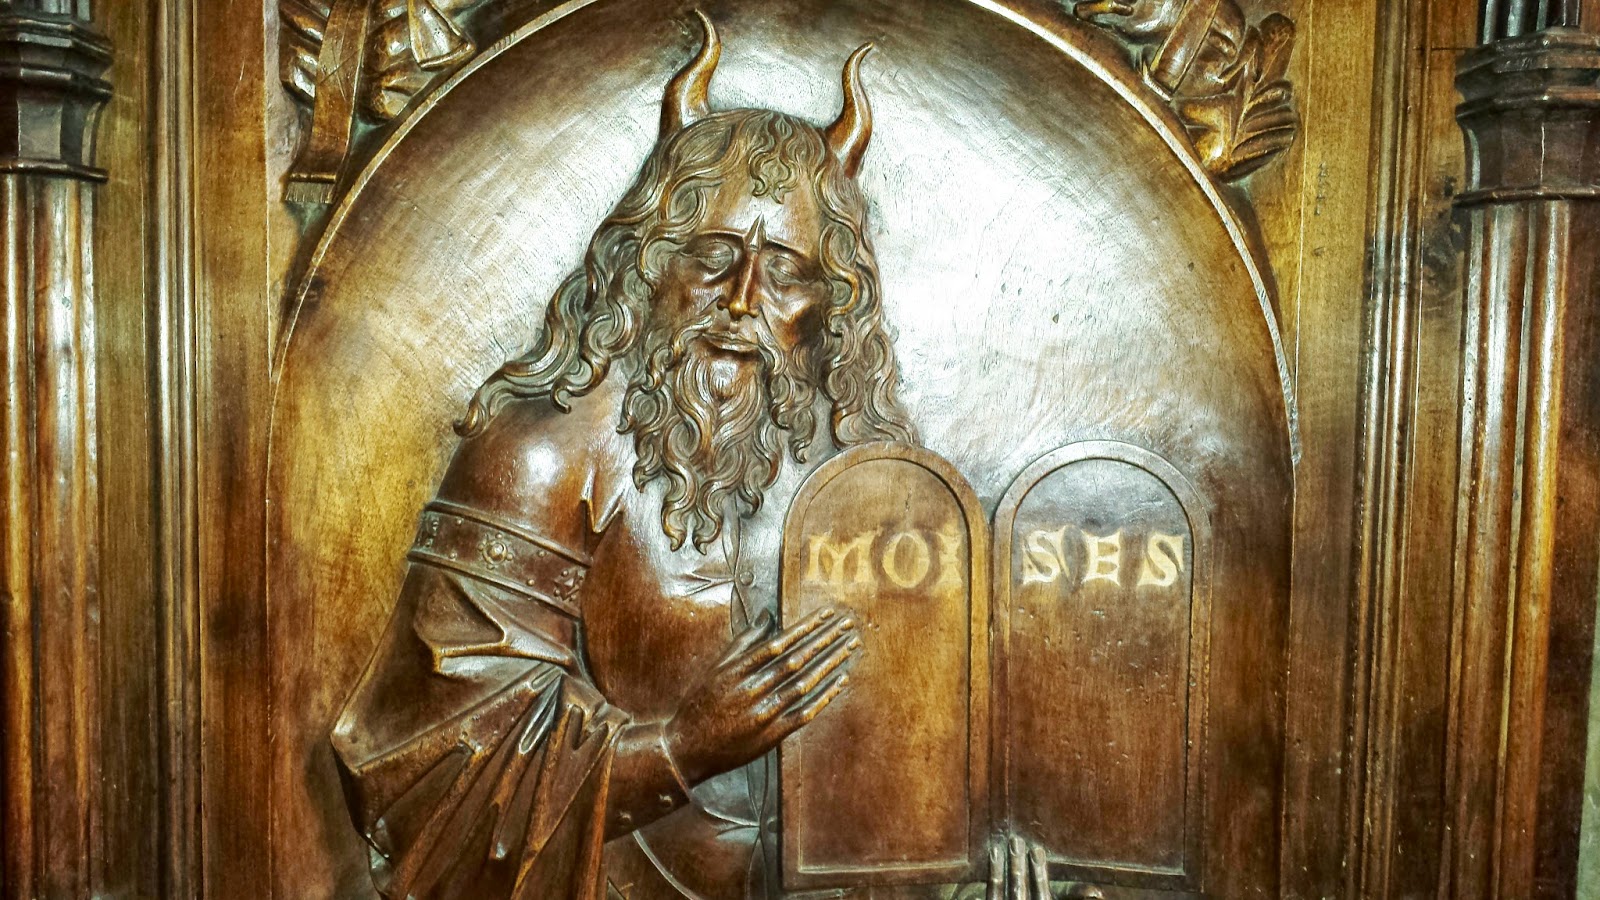 http://dustoffthebible.com/wp-content/uploads/2016/08/Moses-with-horns-wood-carving.jpg